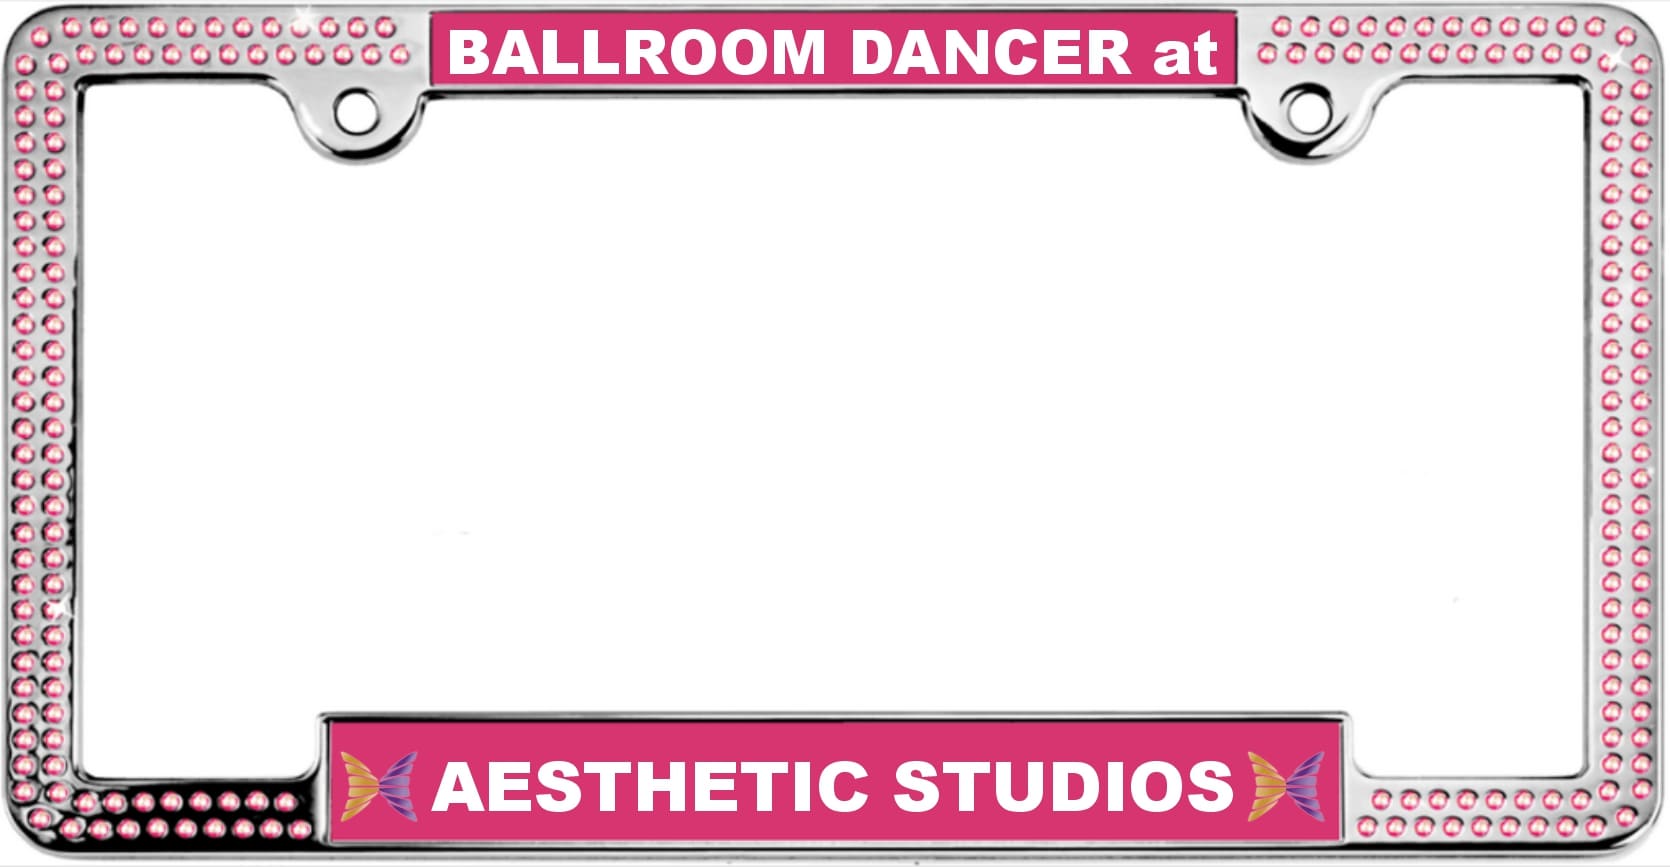 Aesthetic Studios Balroom Dancer - License plate frame with set of metal screws and caps